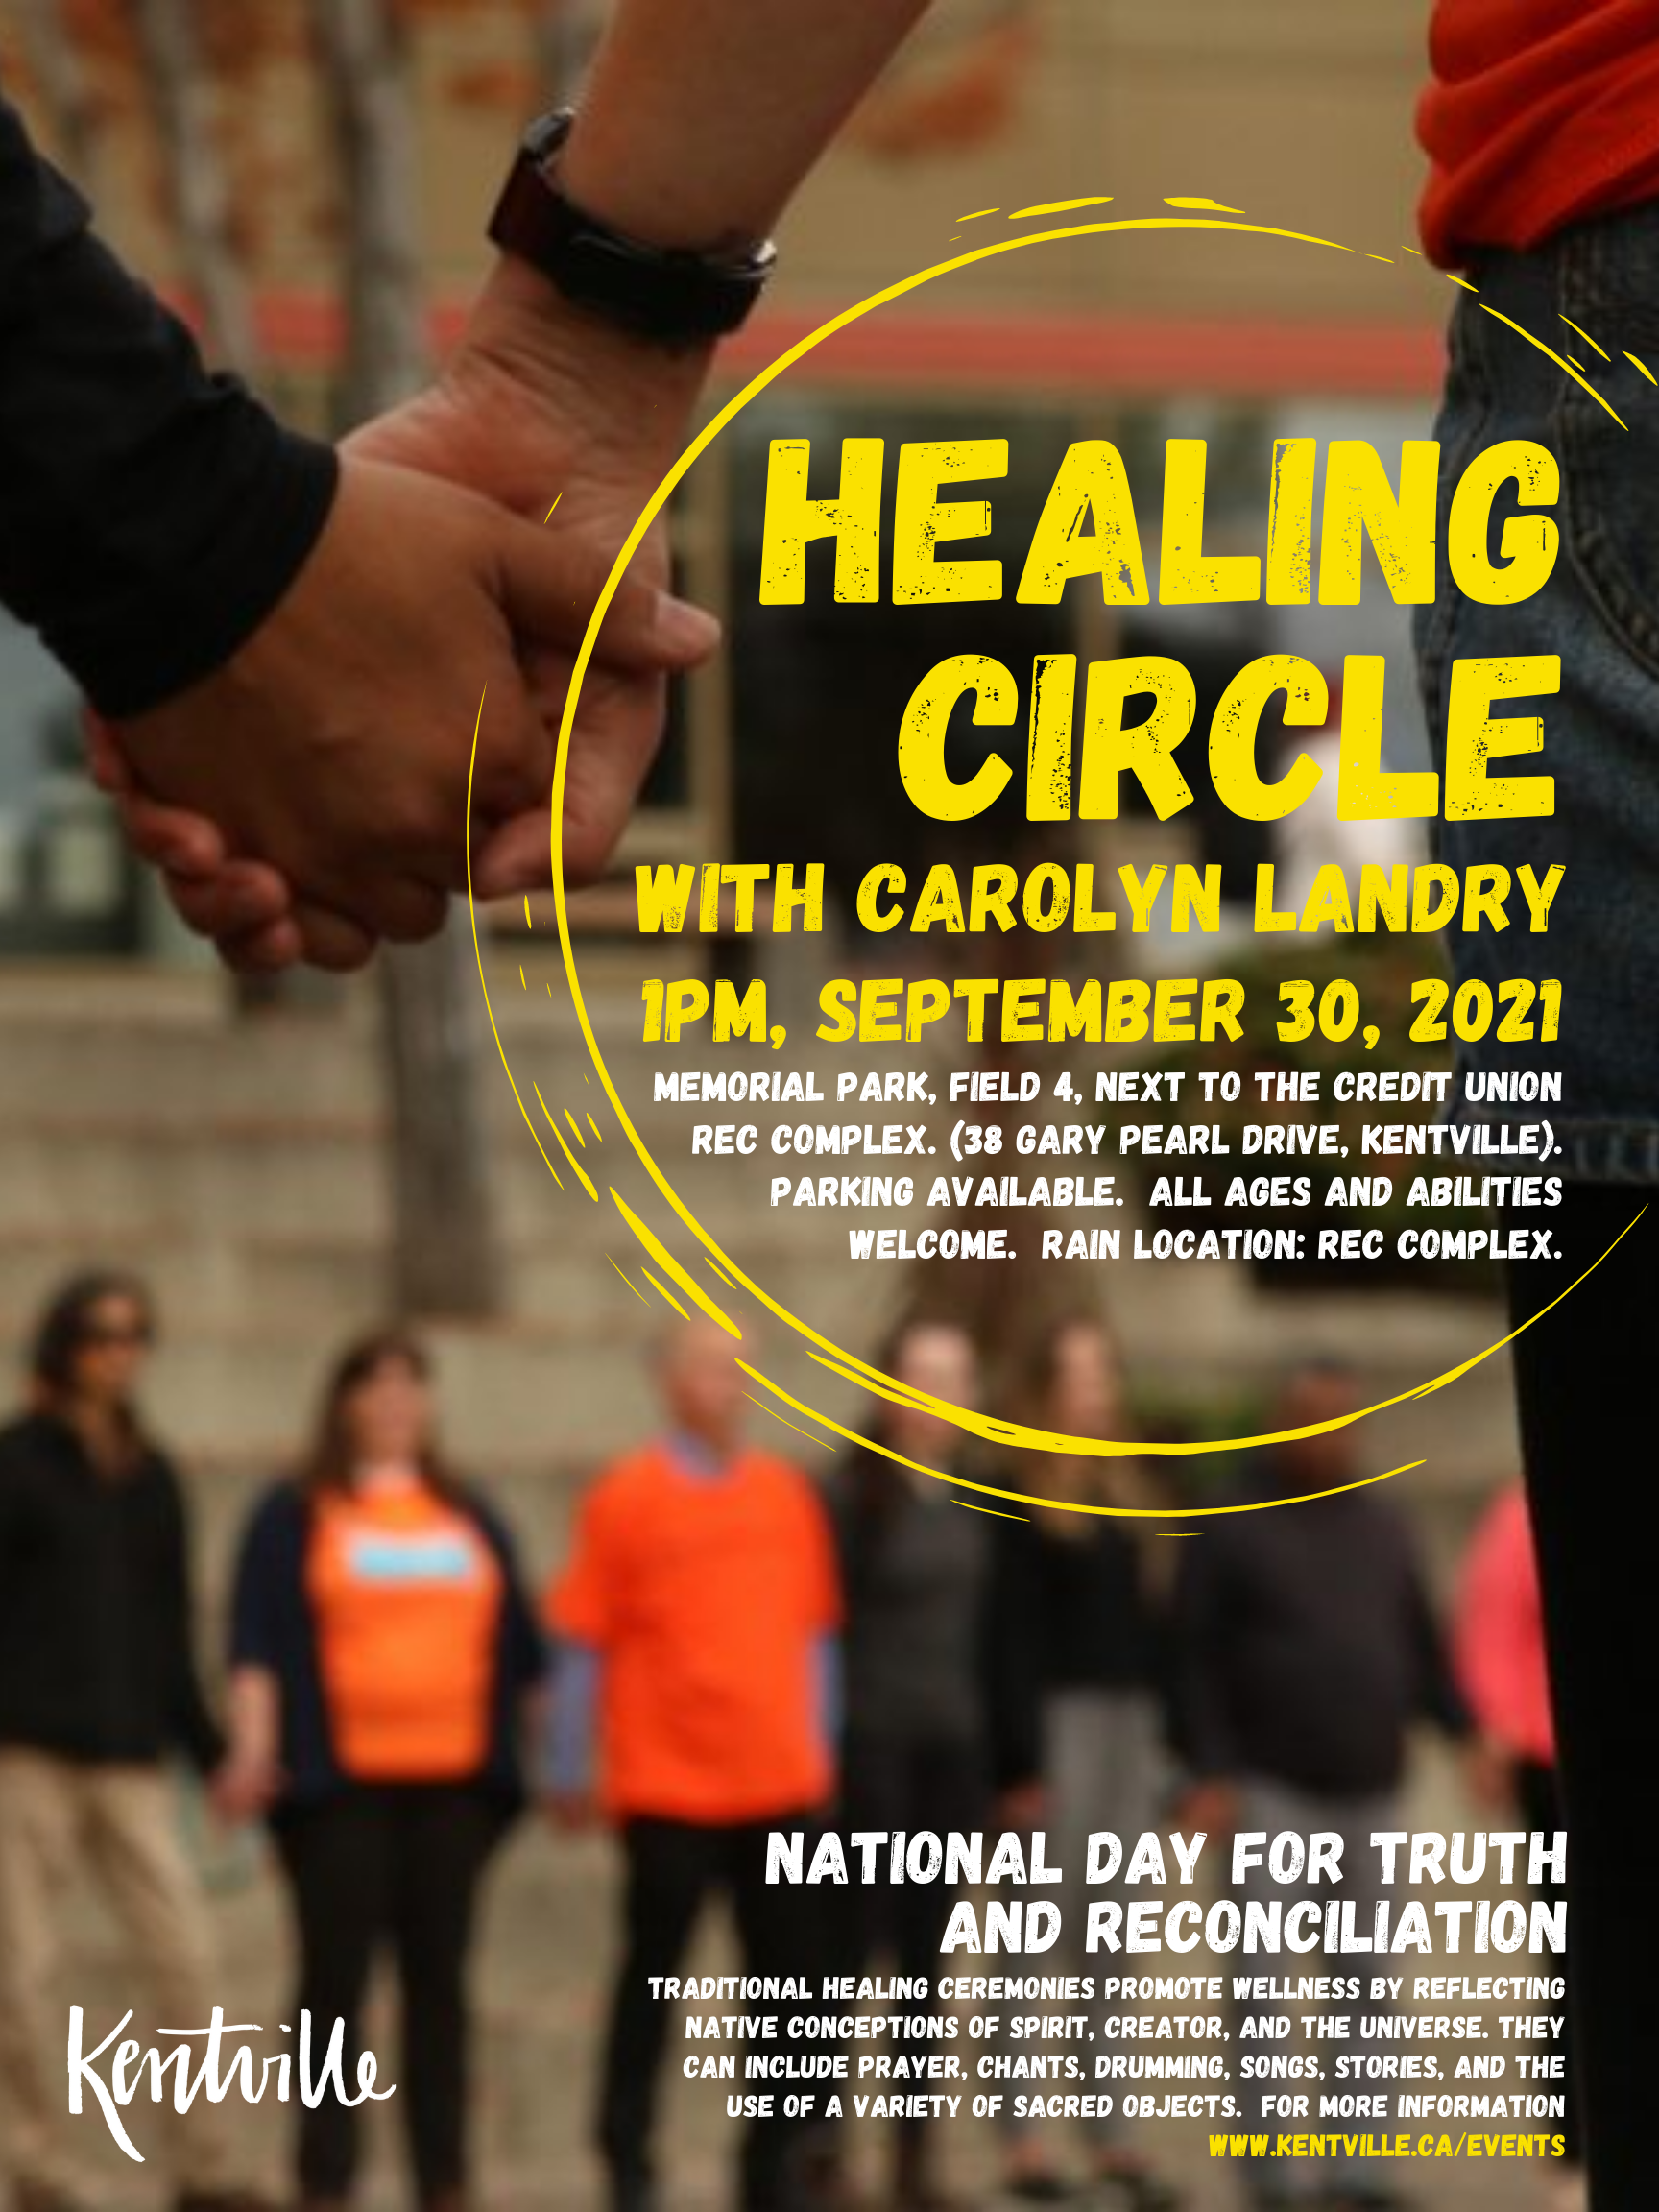 Healing circle poster, showing people in a circle holding hands